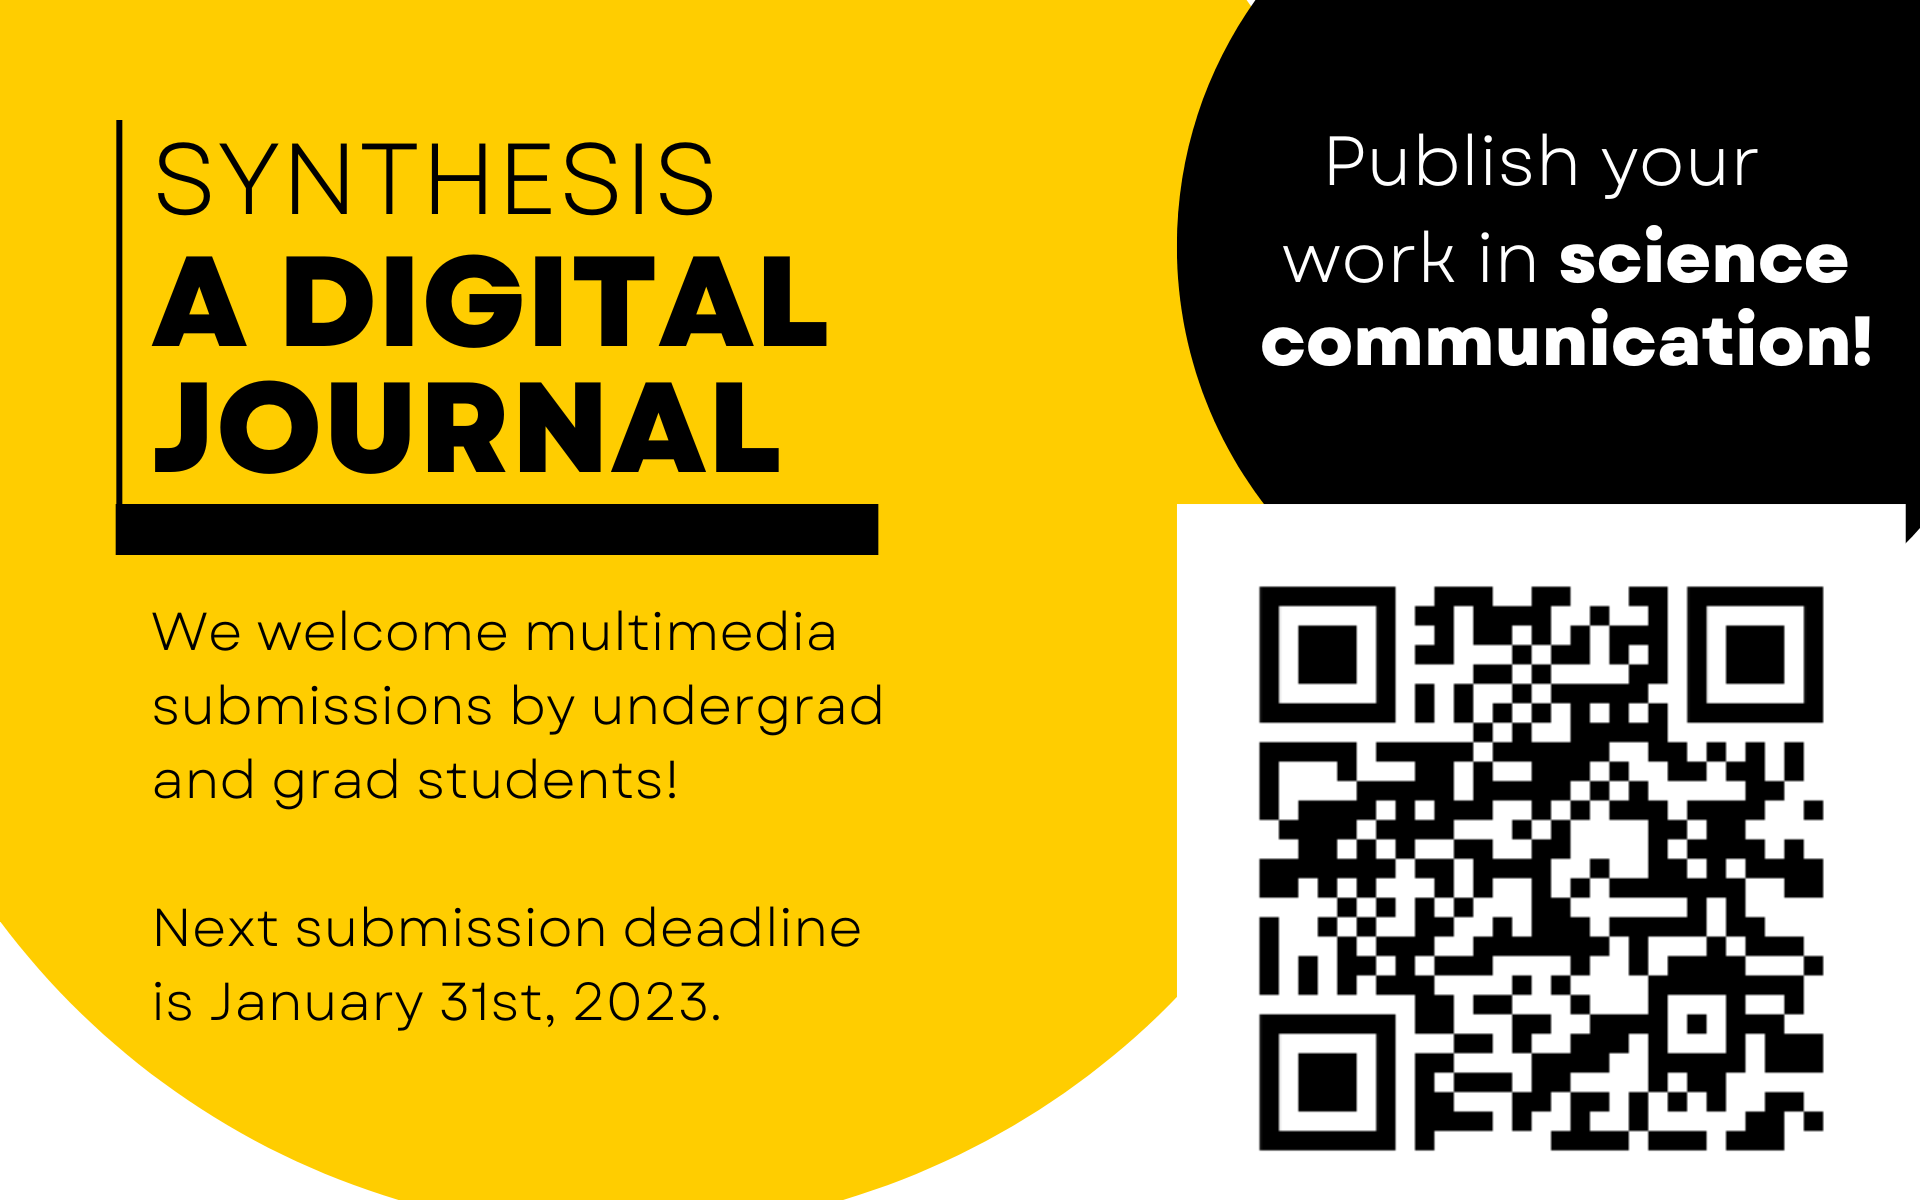 Synthesis – A digital journal. Publish your work in a science communication! Submission deadline is January 31, 2023